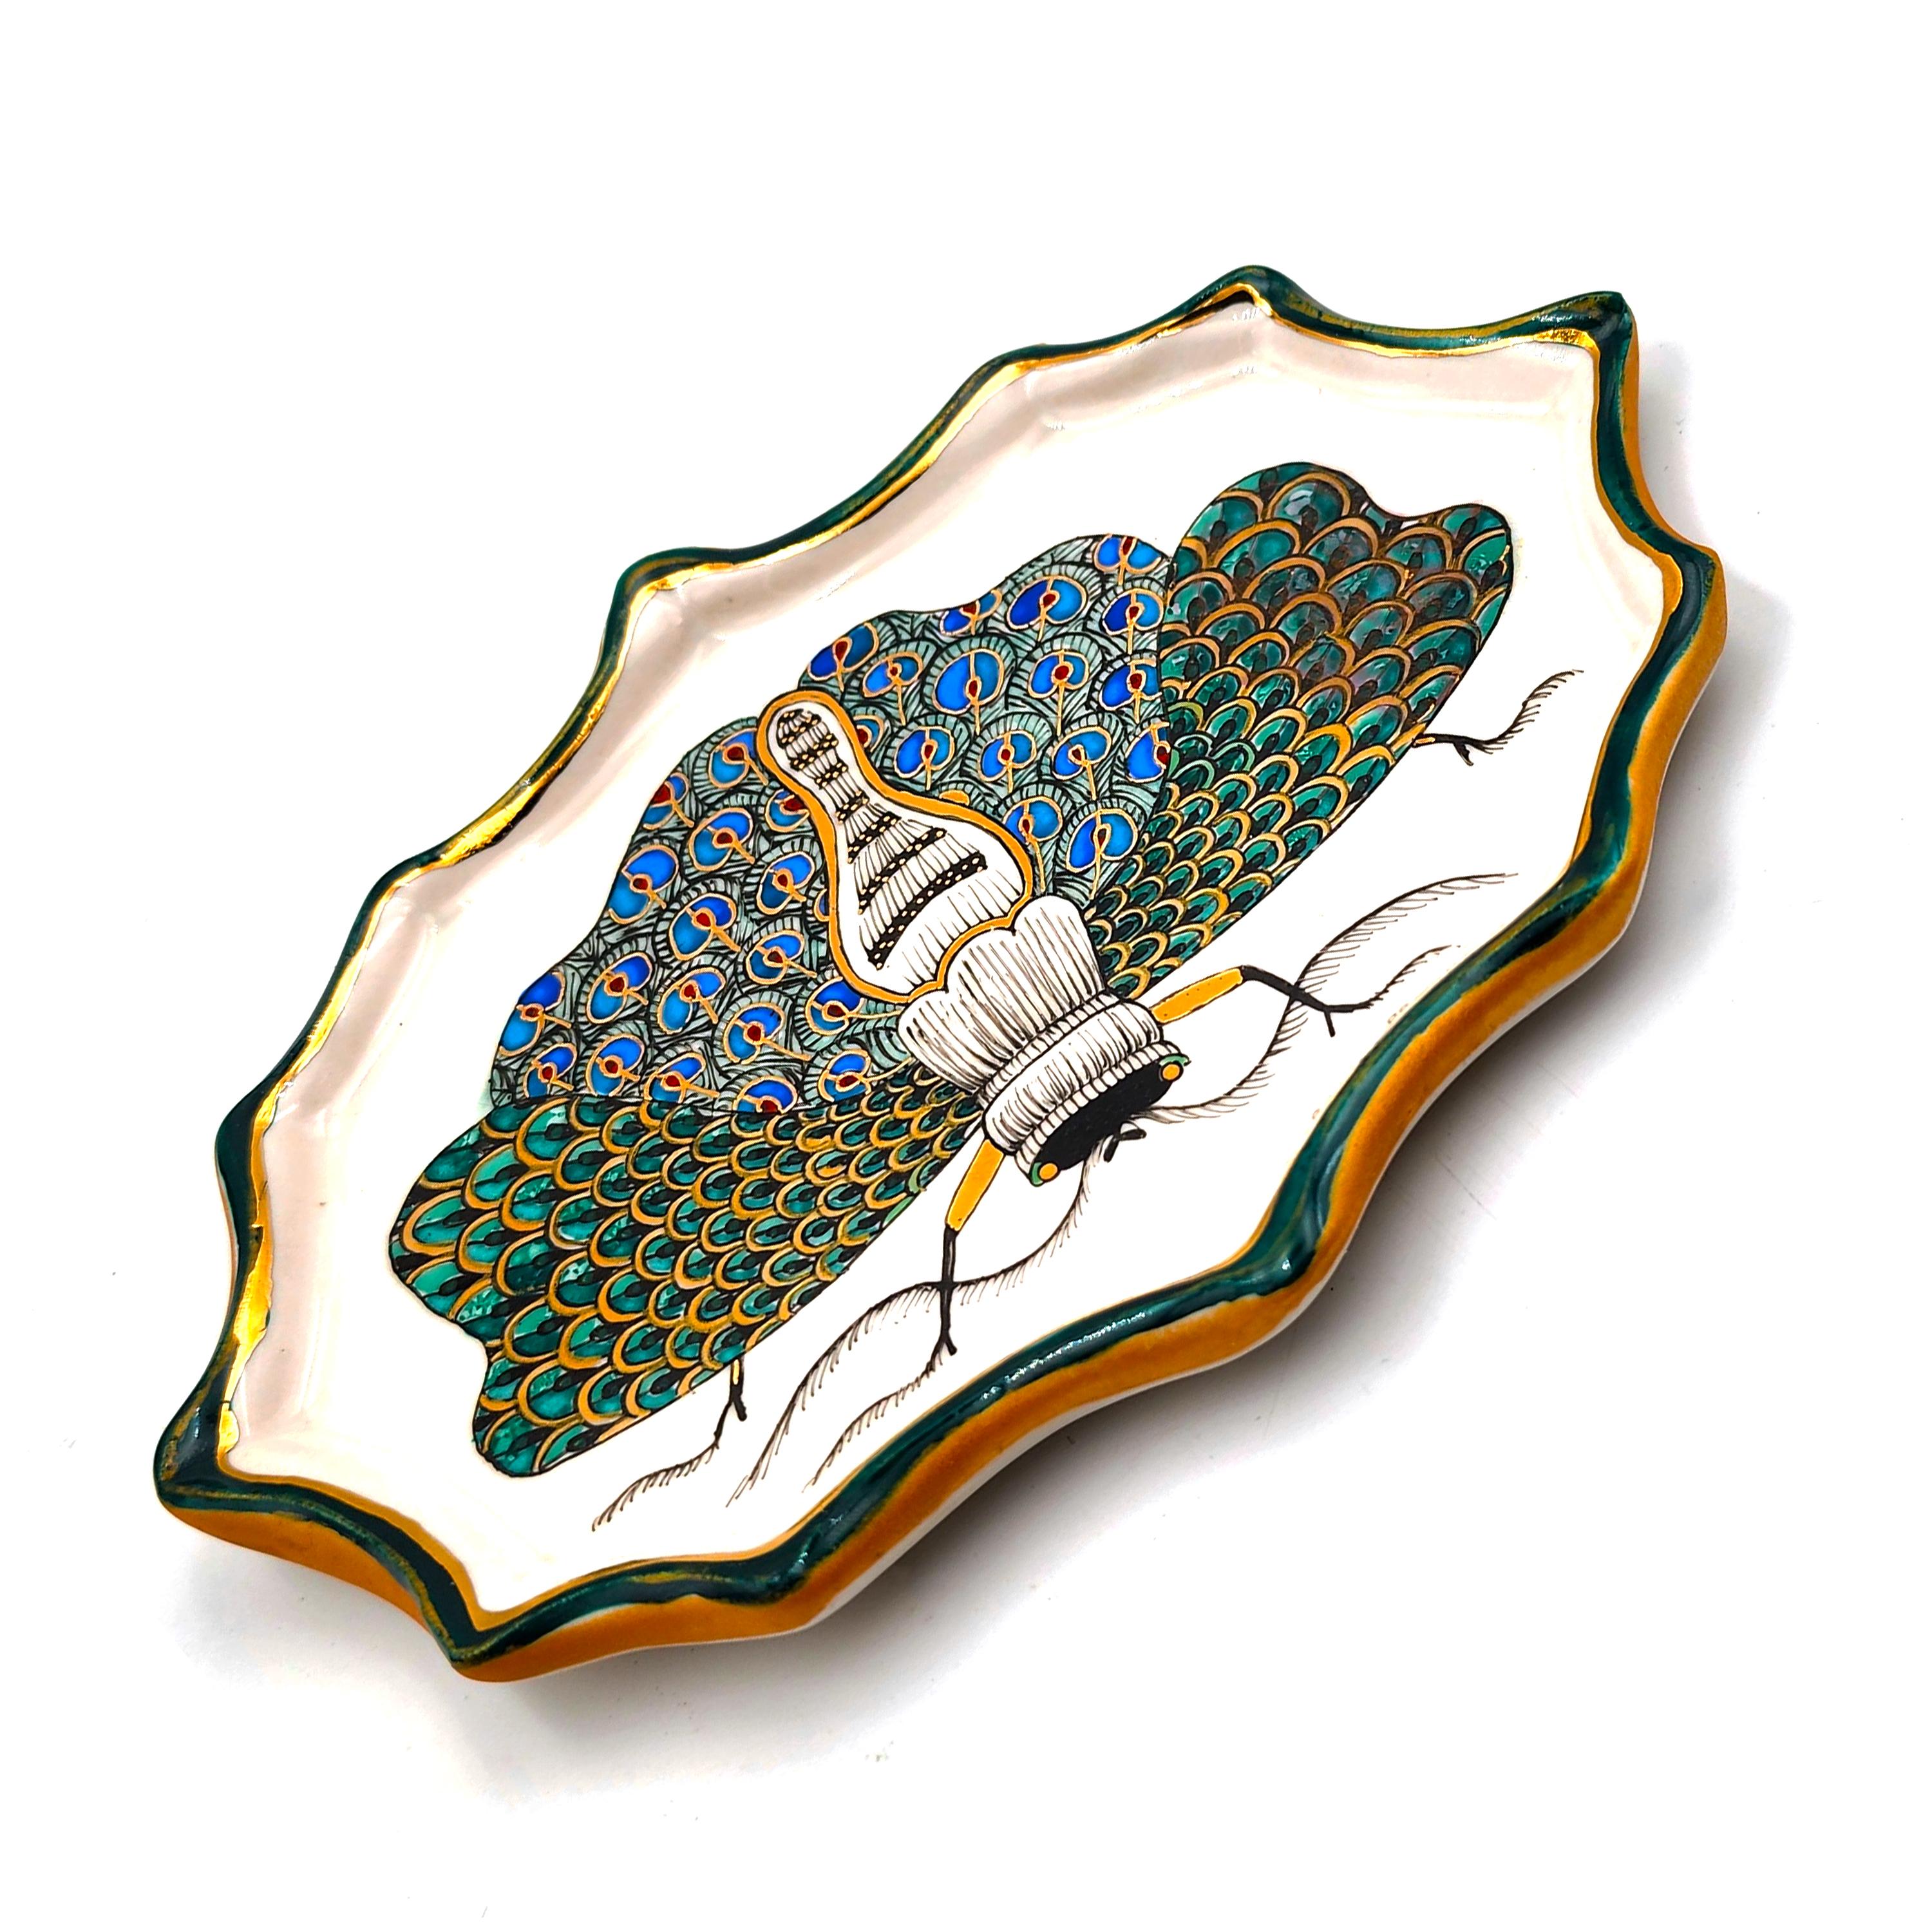 (MADE TO ORDER) (Hand-painted, hand-made, porcelain)
*Lead Time may vary between 1-3 weeks

Melanie Sherman
Vintage Moth IV (Wall Piece/Dish (handpainted)
Porcelain, Glaze, Overglaze, Chinapaints, 24k German Gold Luster, Brass Wire (for hanging, can